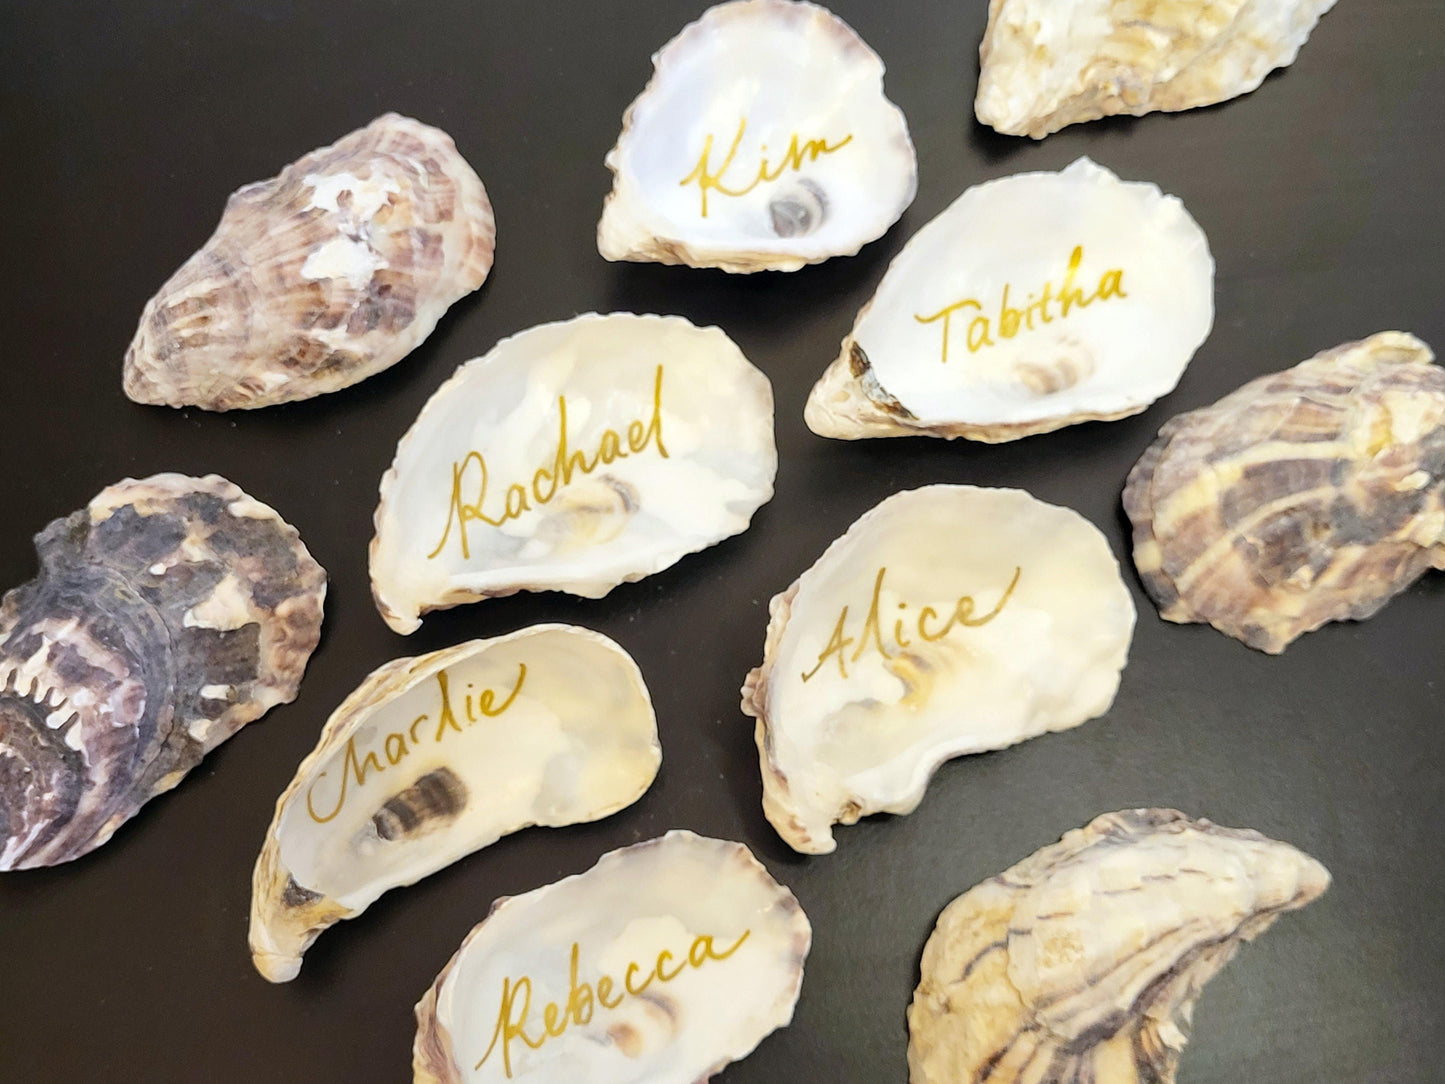 Personalised Oyster Shells name cards - Wedding place names - Shell Place cards - Oyster place settings - Agate Placemats alternative escort